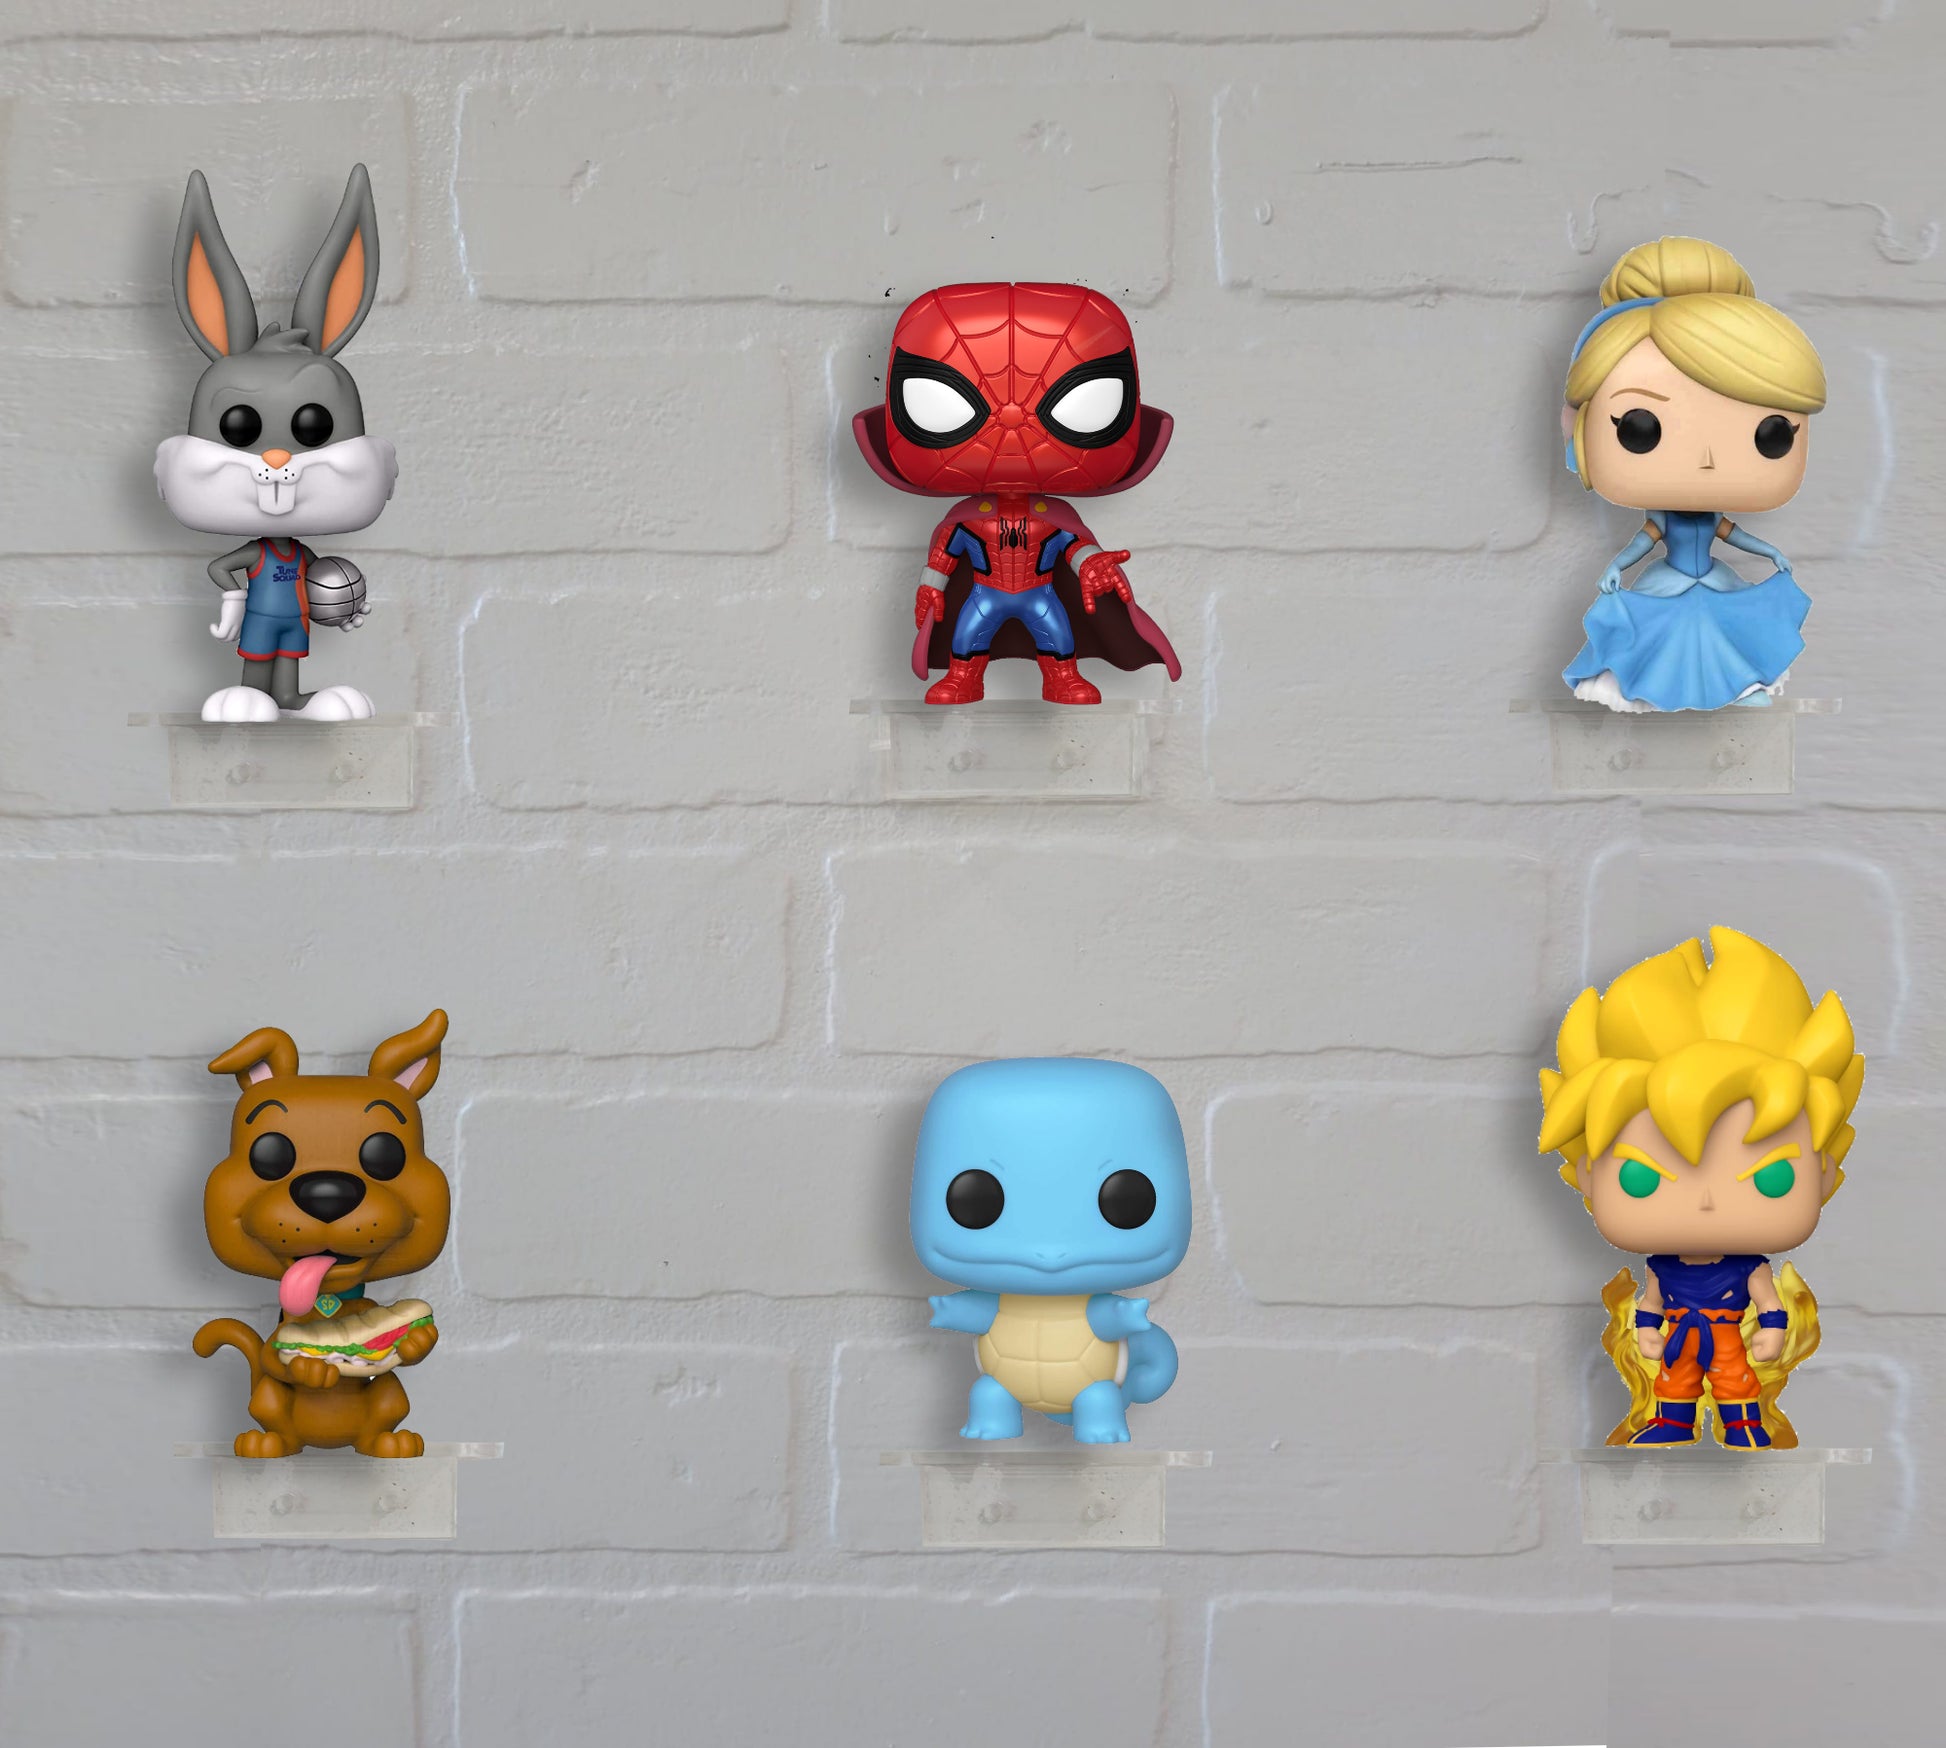 For Funko Pop Vinyl and Funko Pin: Clear Acrylic Wall Stand, Stick On, Single Shelf No Nails or Screws